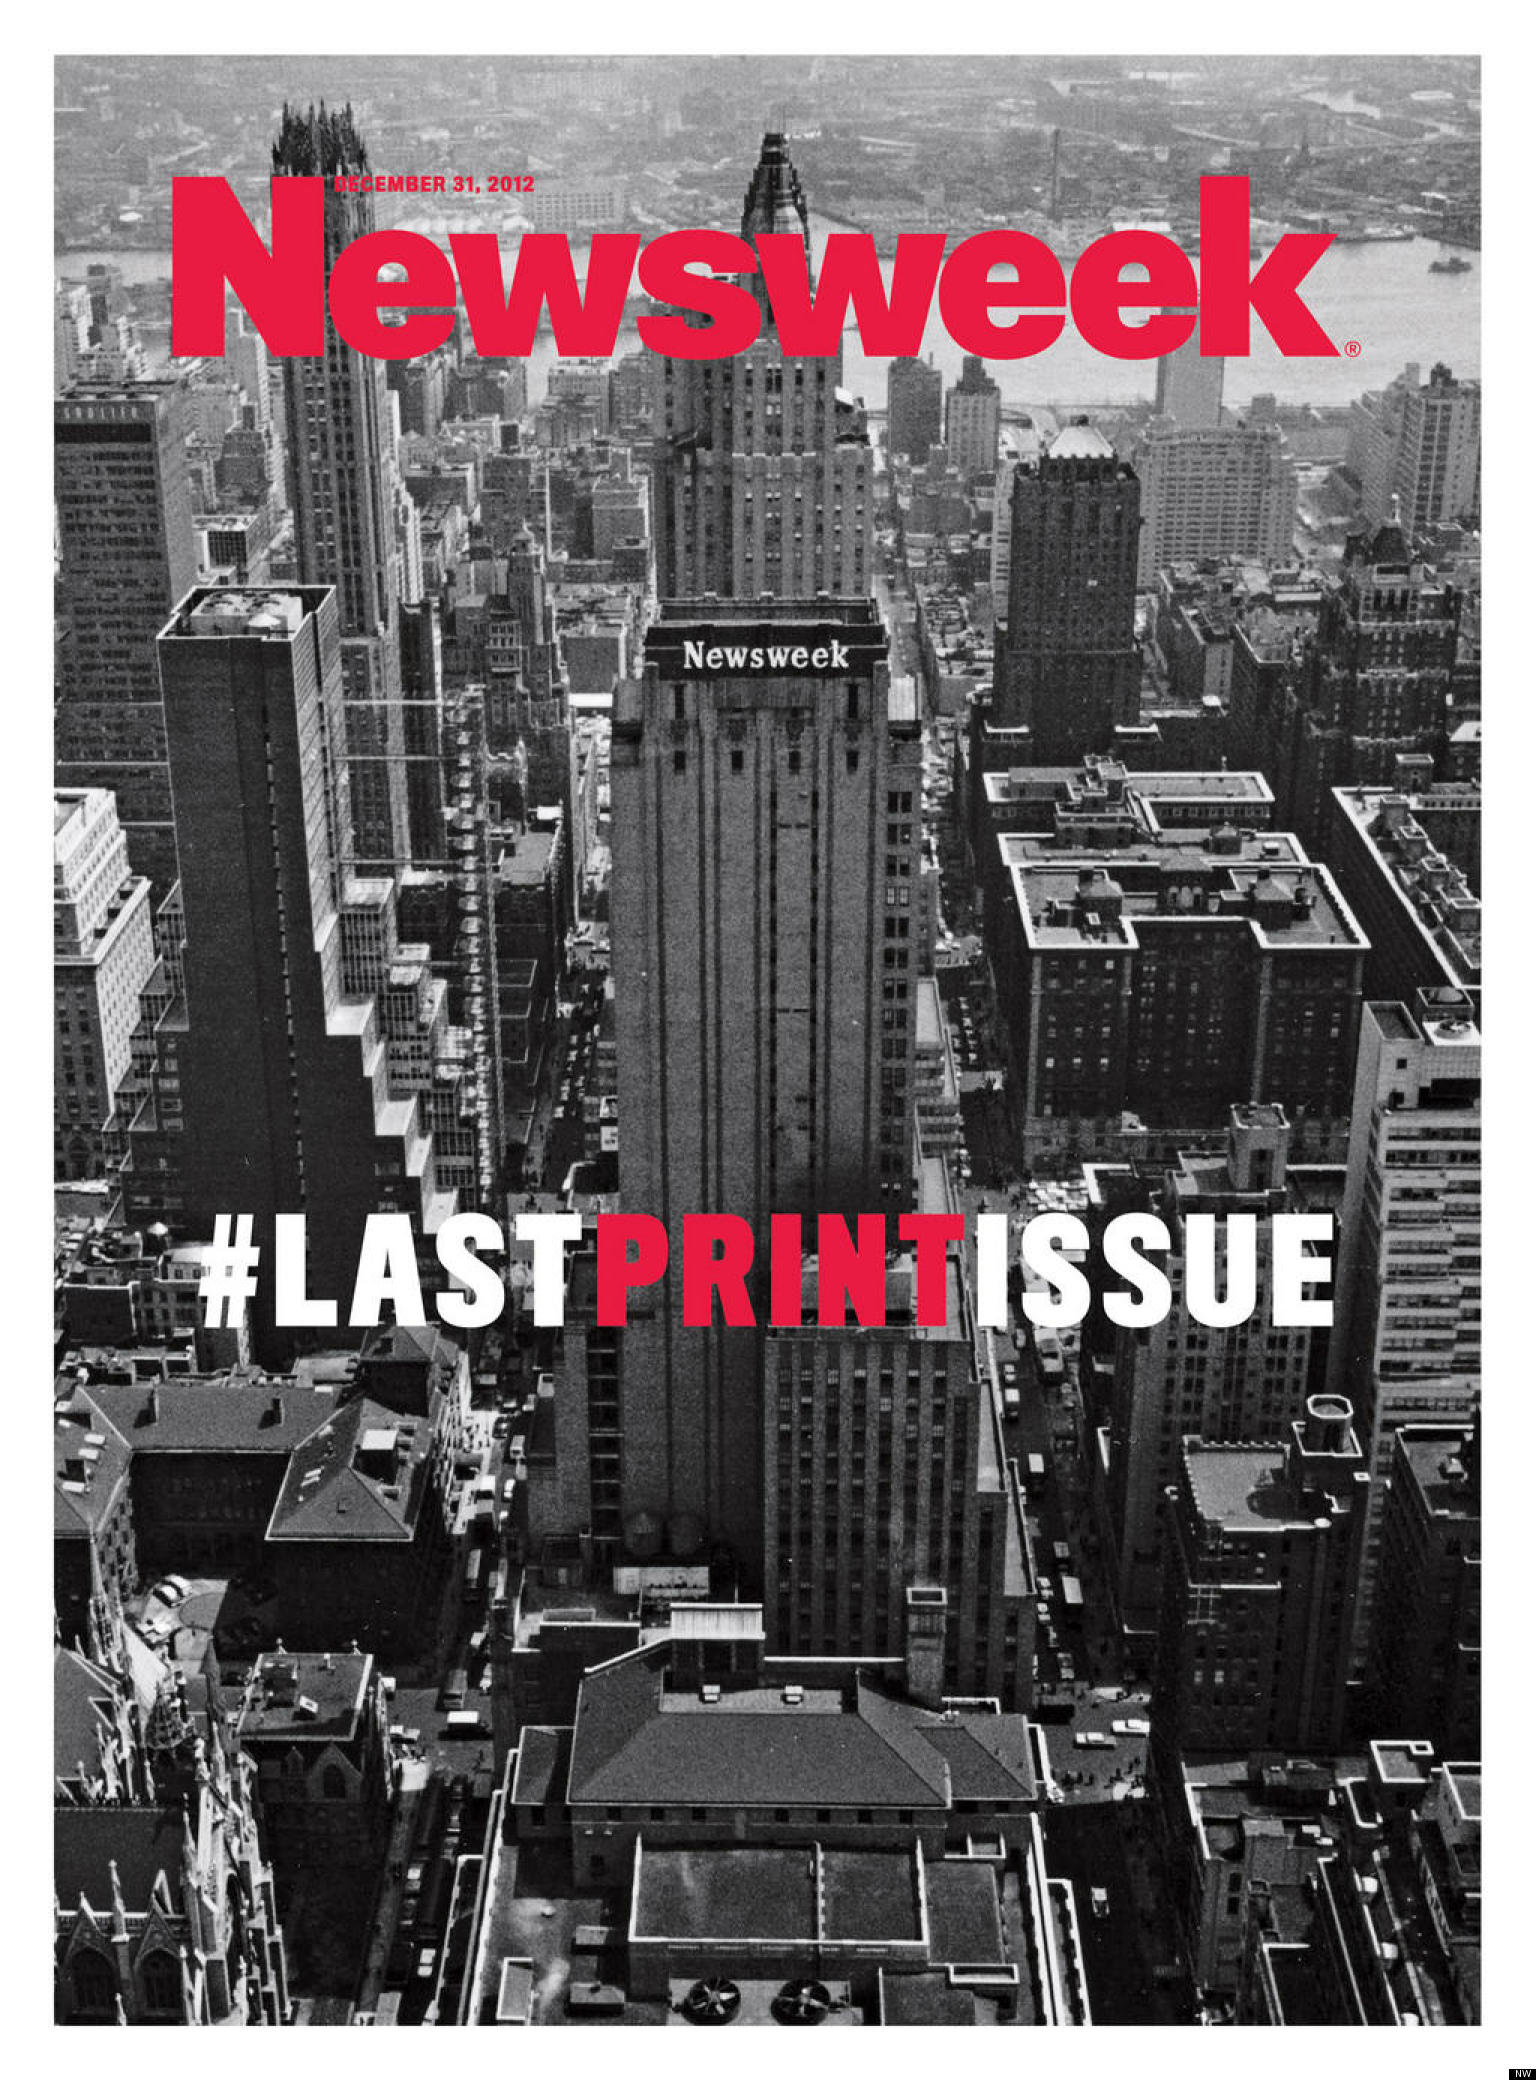 Newsweek's Last Print Issue Cover Released (PHOTO) HuffPost